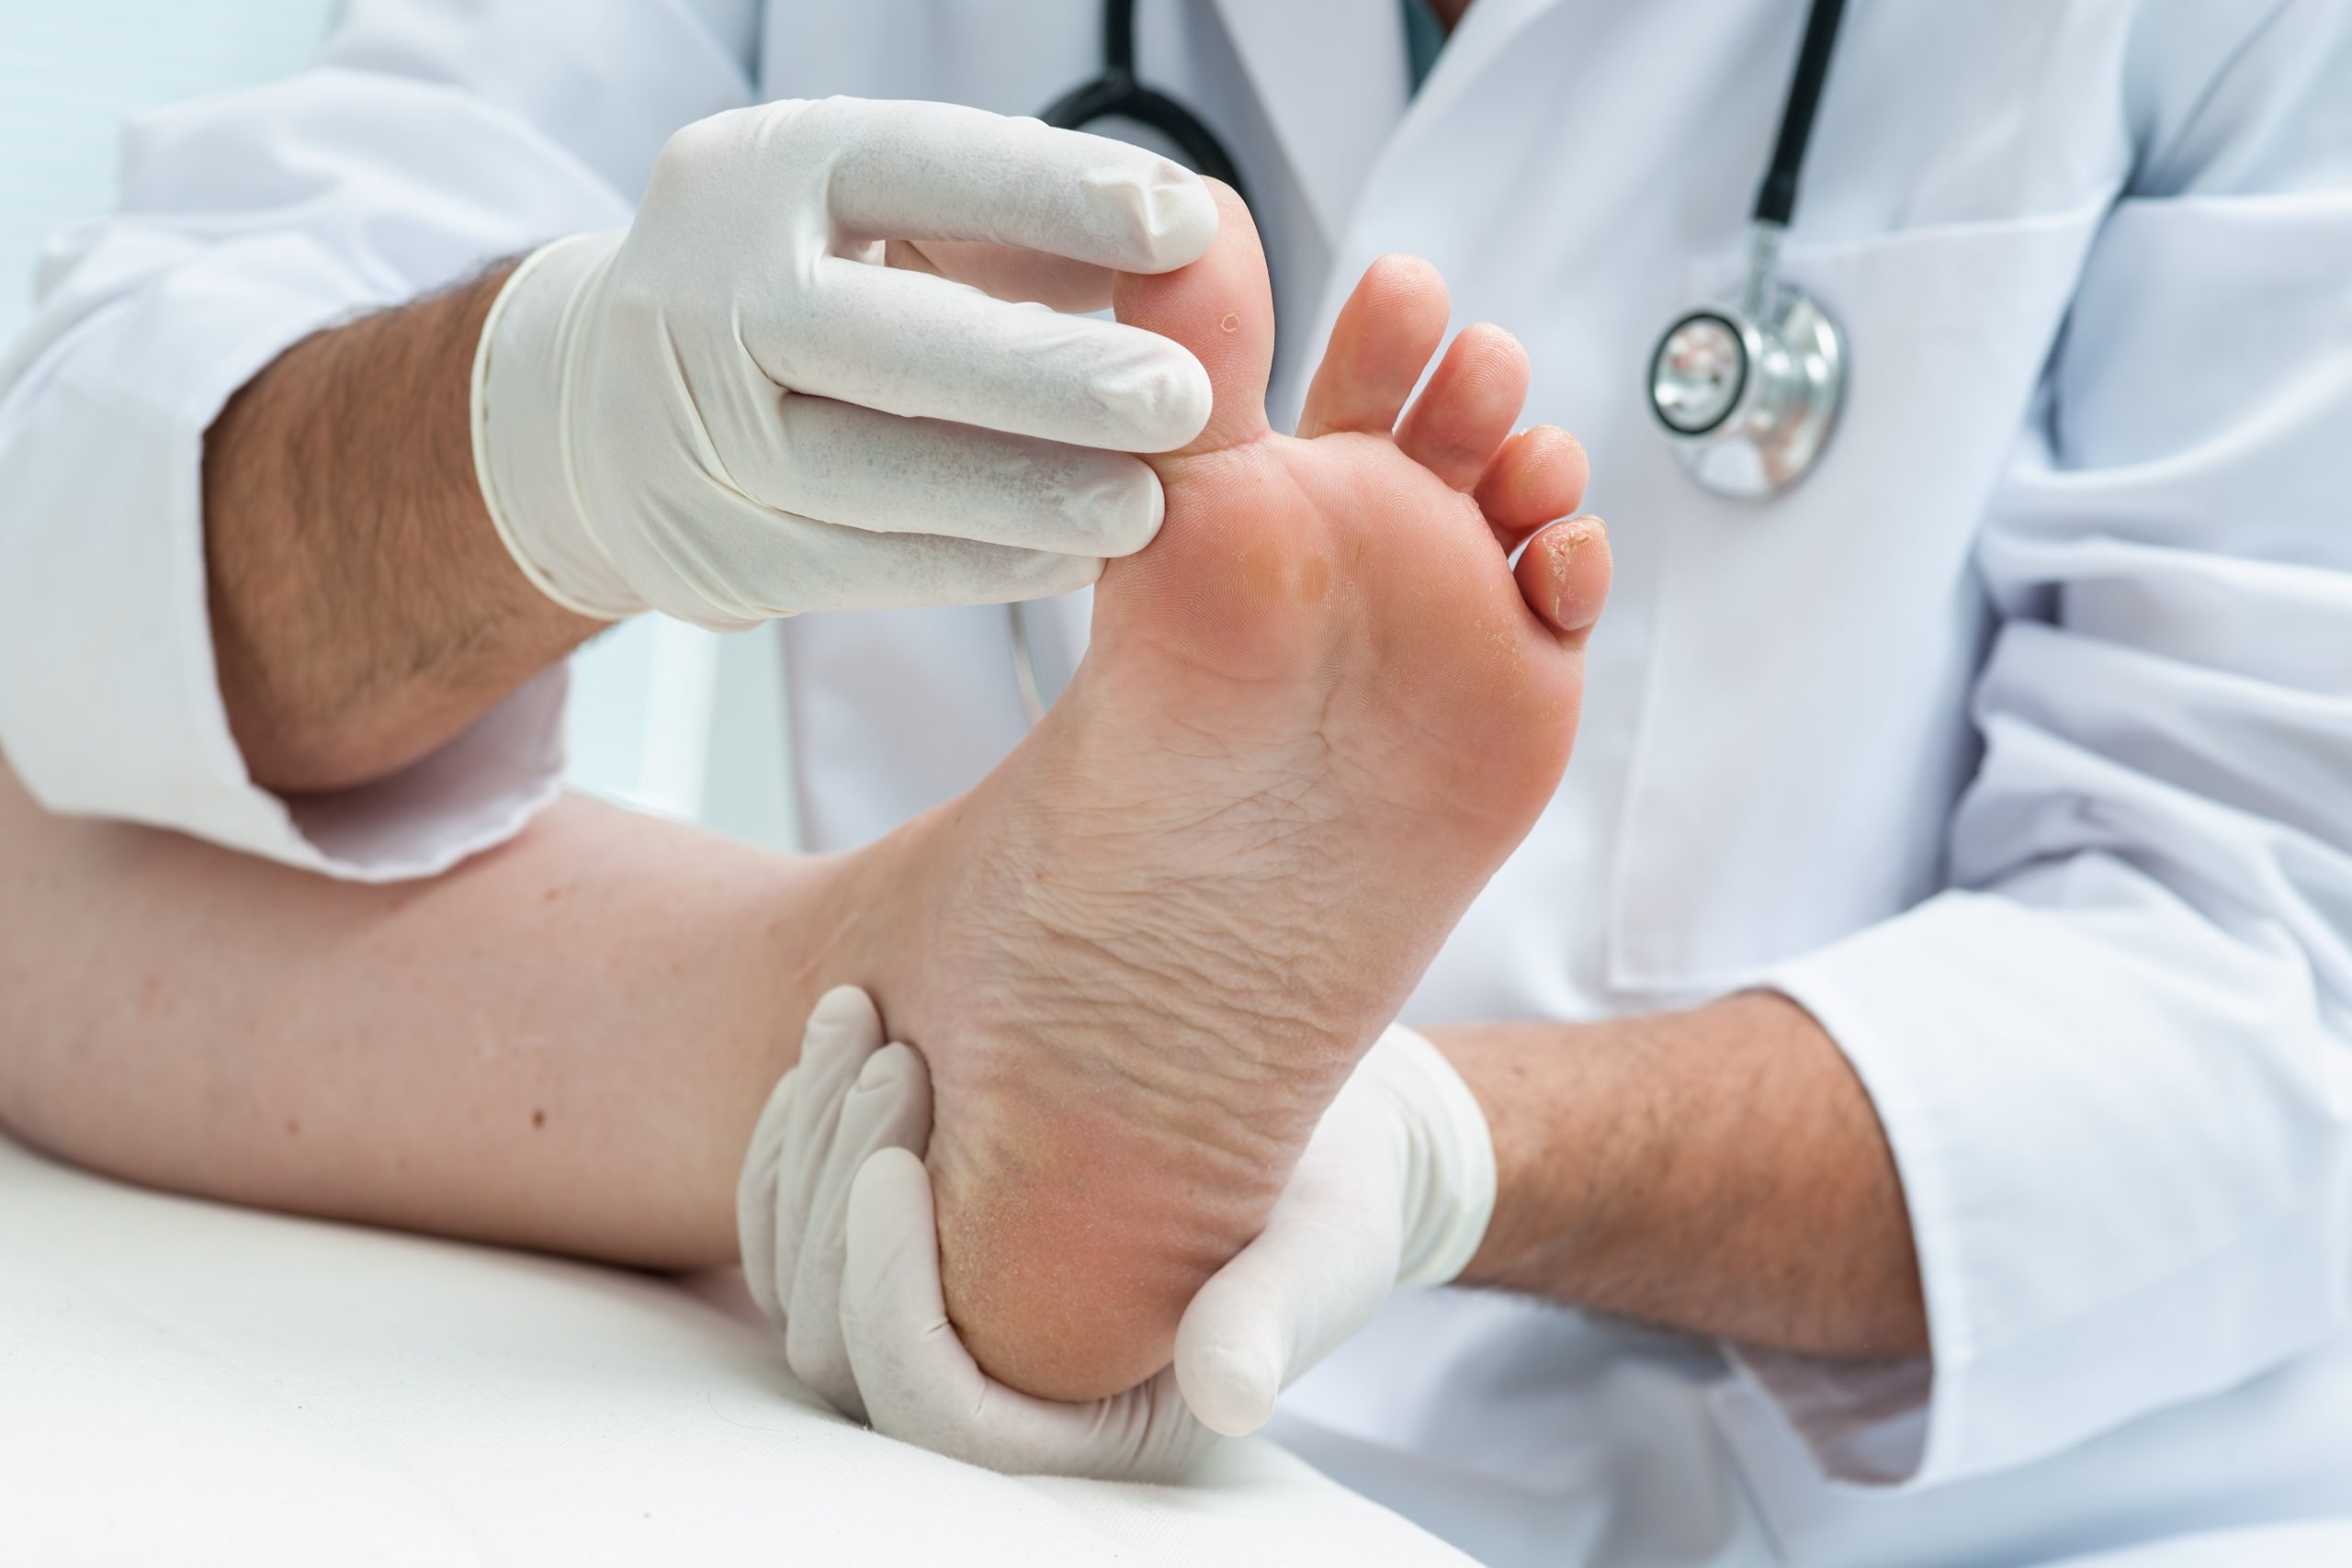 The symptoms of toenail fungus and how to diagnose it